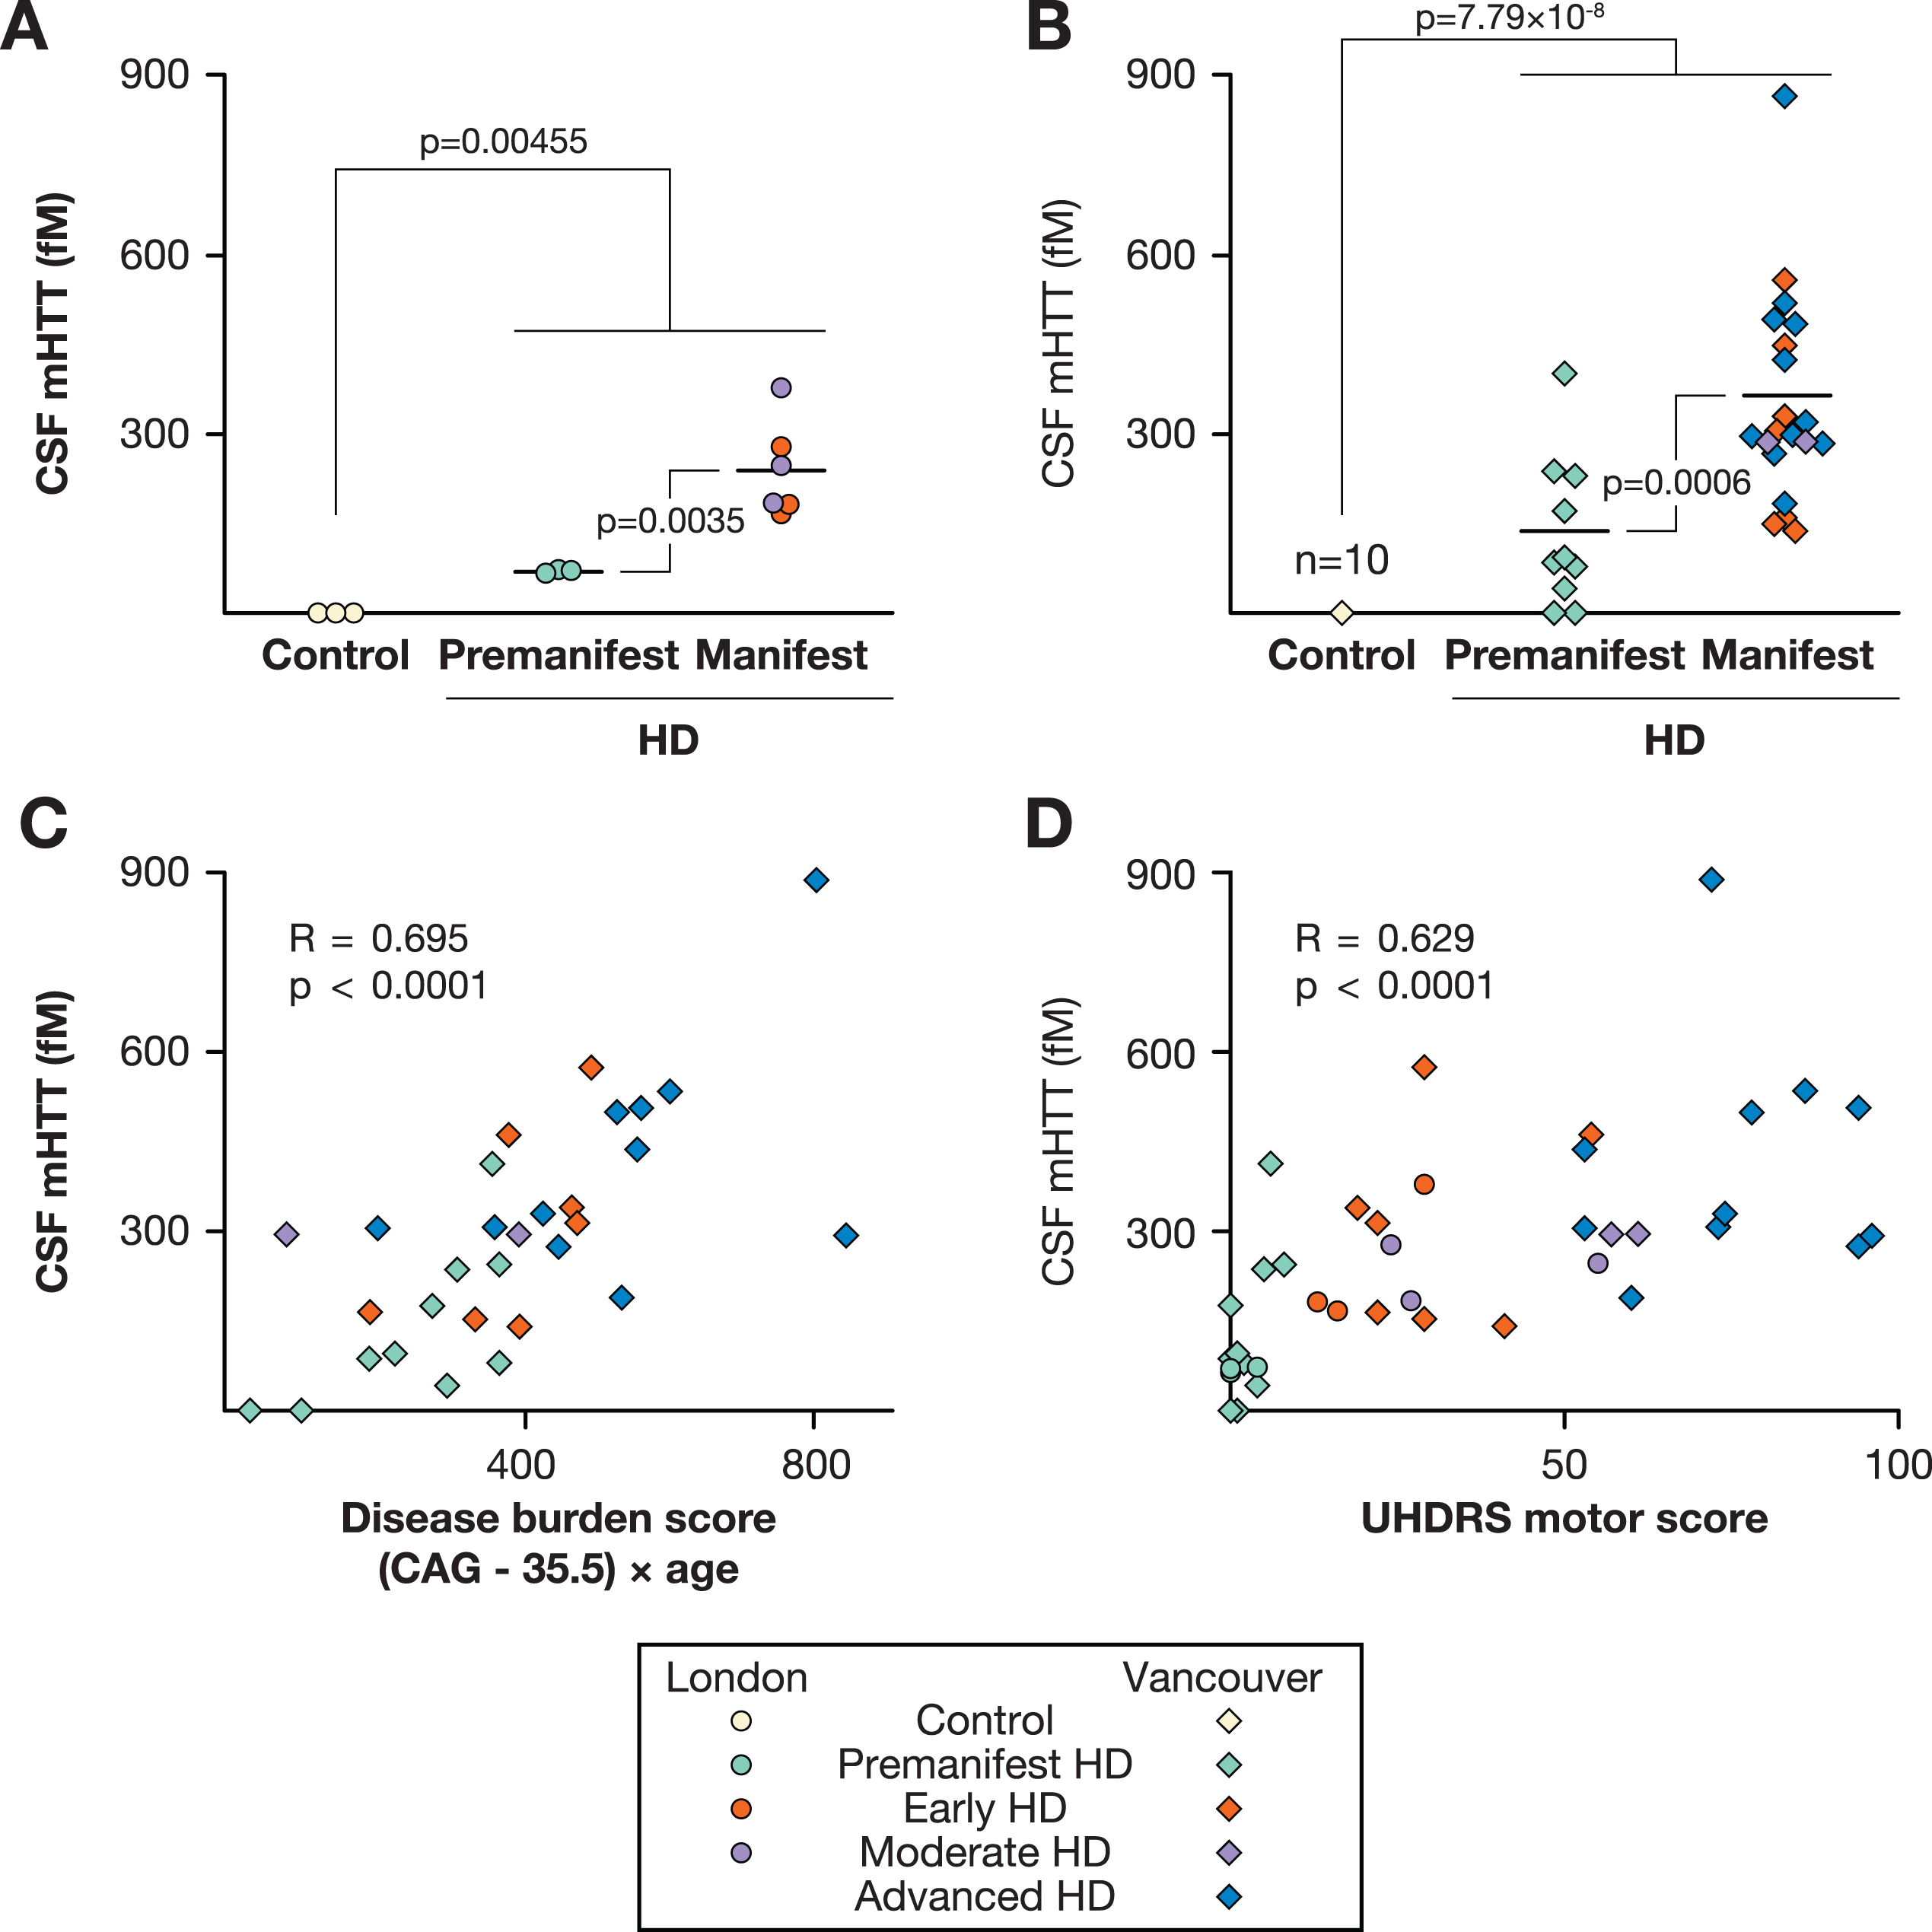 First successful quantification of mHTT 
in CSF using the Singulex SMC immunoassay. mHTT was significantly higher in premanifest than controls and in 
manifest HD than premanifest in two cohorts from (A) London cohort and (B) Vancouver. mHTT correlated with (C) 
disease burden score and (D) Unified Huntington’s Disease Rating Scale motor score. Adapted from Wild et al. [83] 
with the author’s 
and publisher’s permission.